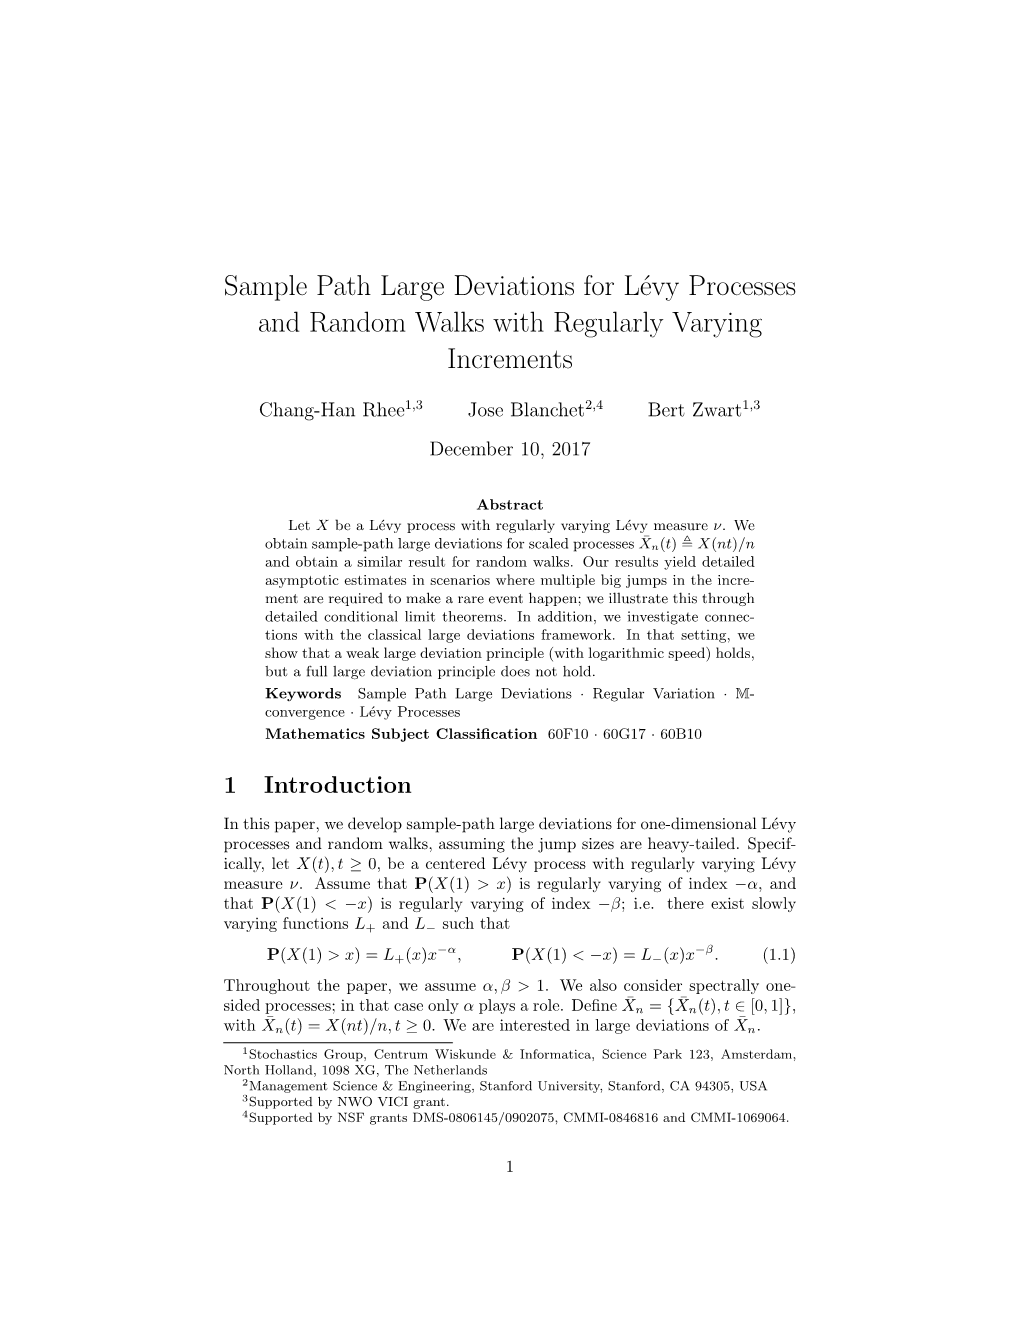 Sample Path Large Deviations for Lévy Processes and Random